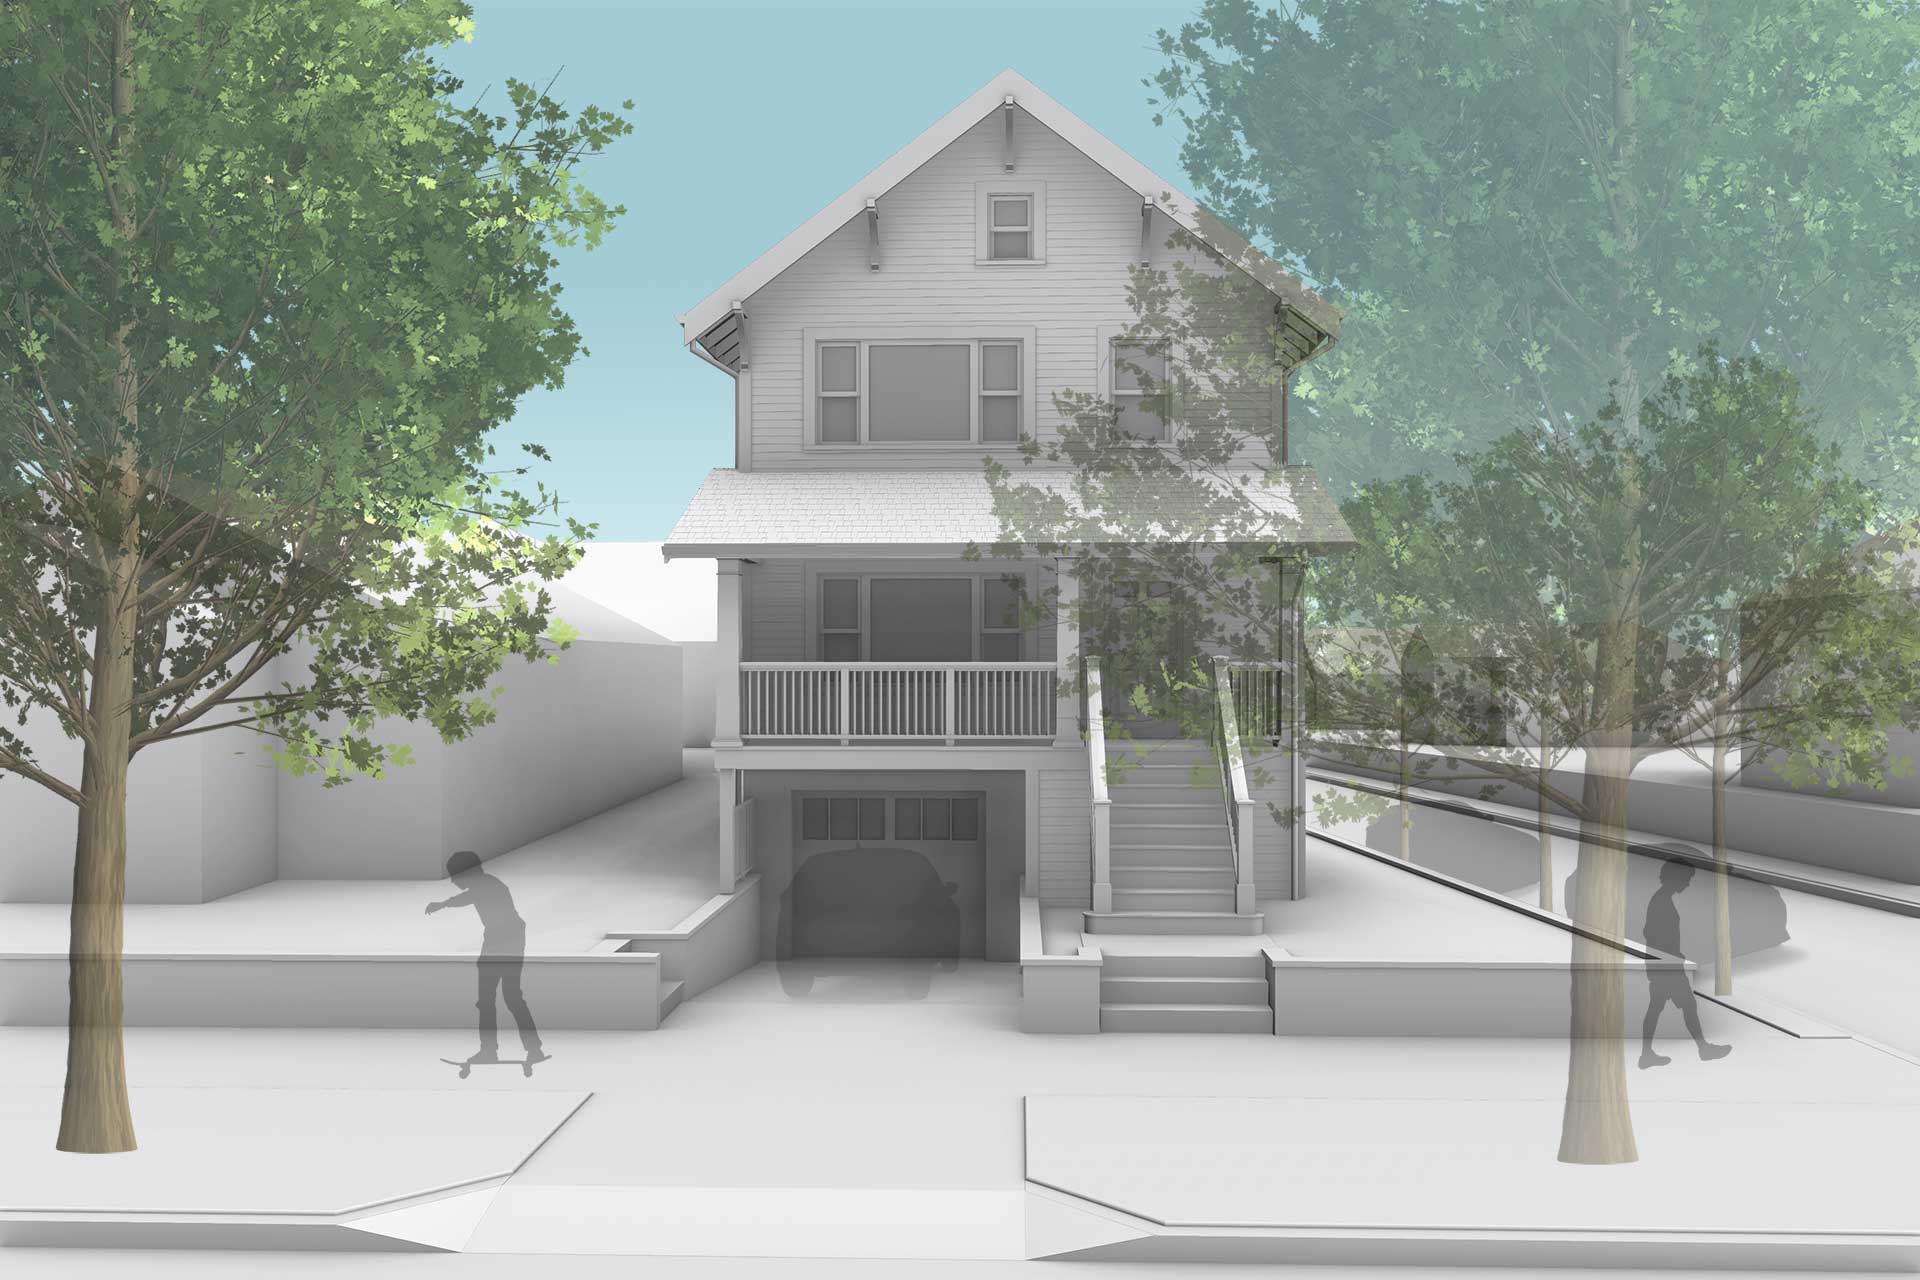 Front elevation view of the multigenerational Portland Craftsman showing the tuck-under garage and large front porch.